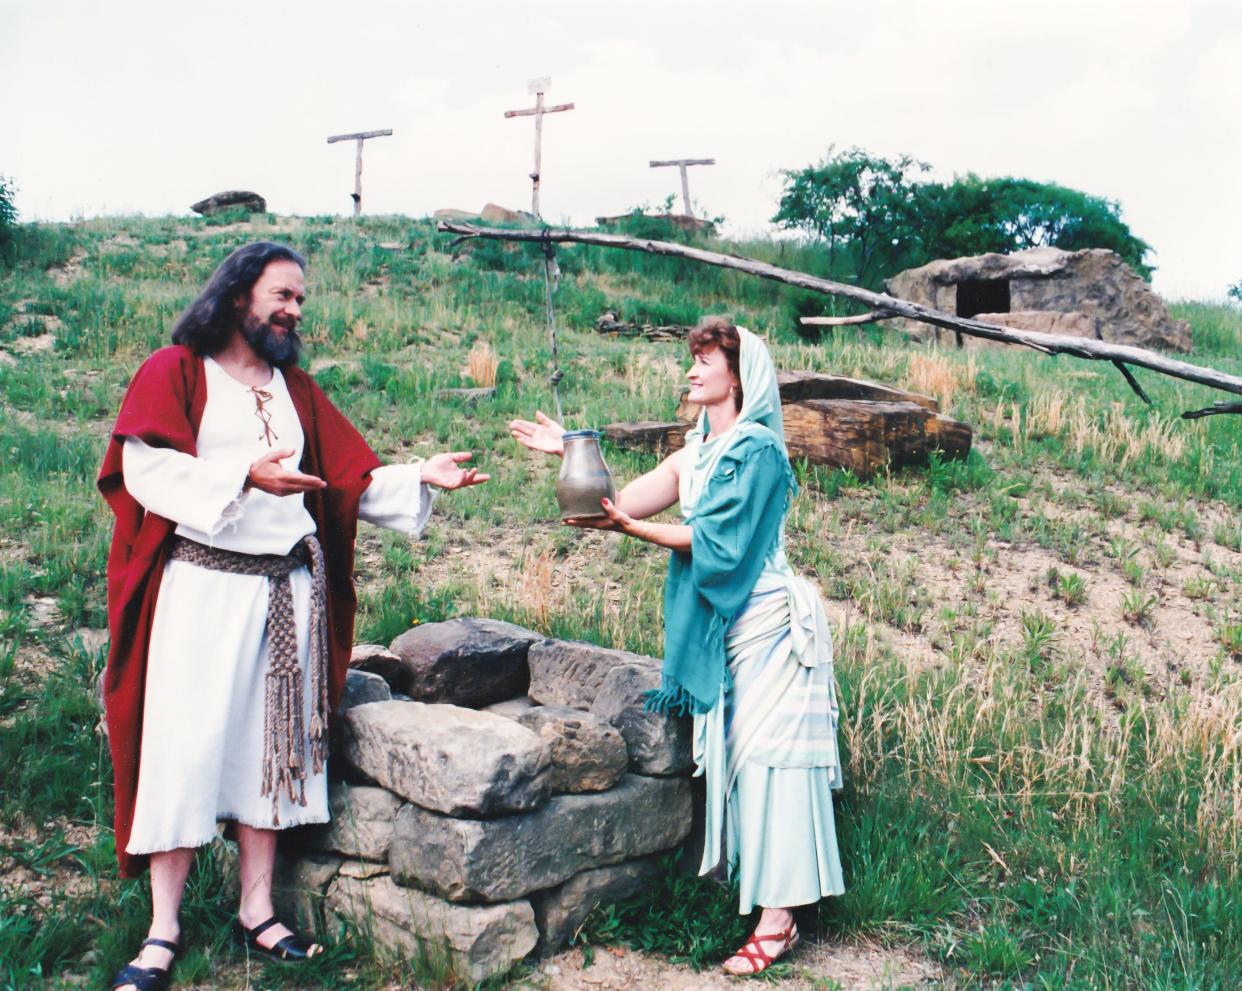 Cal Rice and Annette Ellwood act out a scene at The Living Word Outdoor Drama. The first person ever cast in the show was Ellwood. Rice was recruited from another passion play in Ohio by the drama's founder and played the role of Jesus for decades.